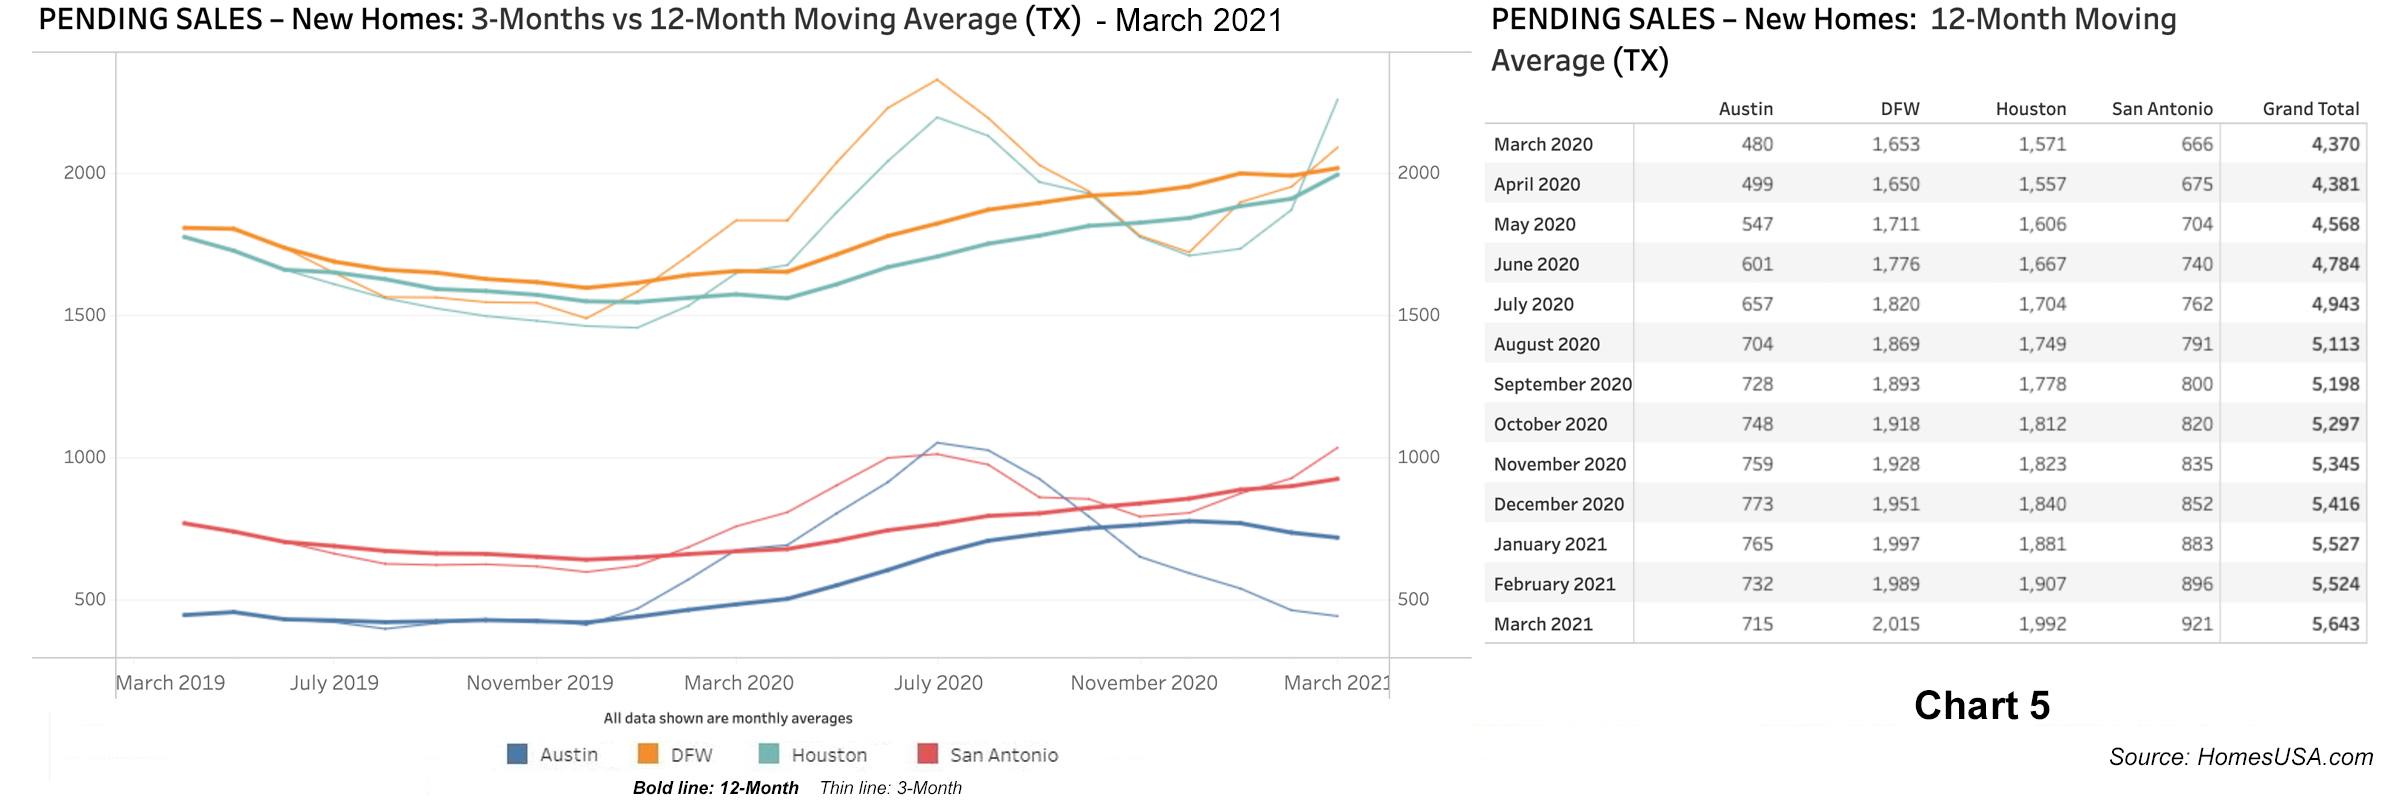 Chart 5: Texas Pending New Homes Sales - March 2021